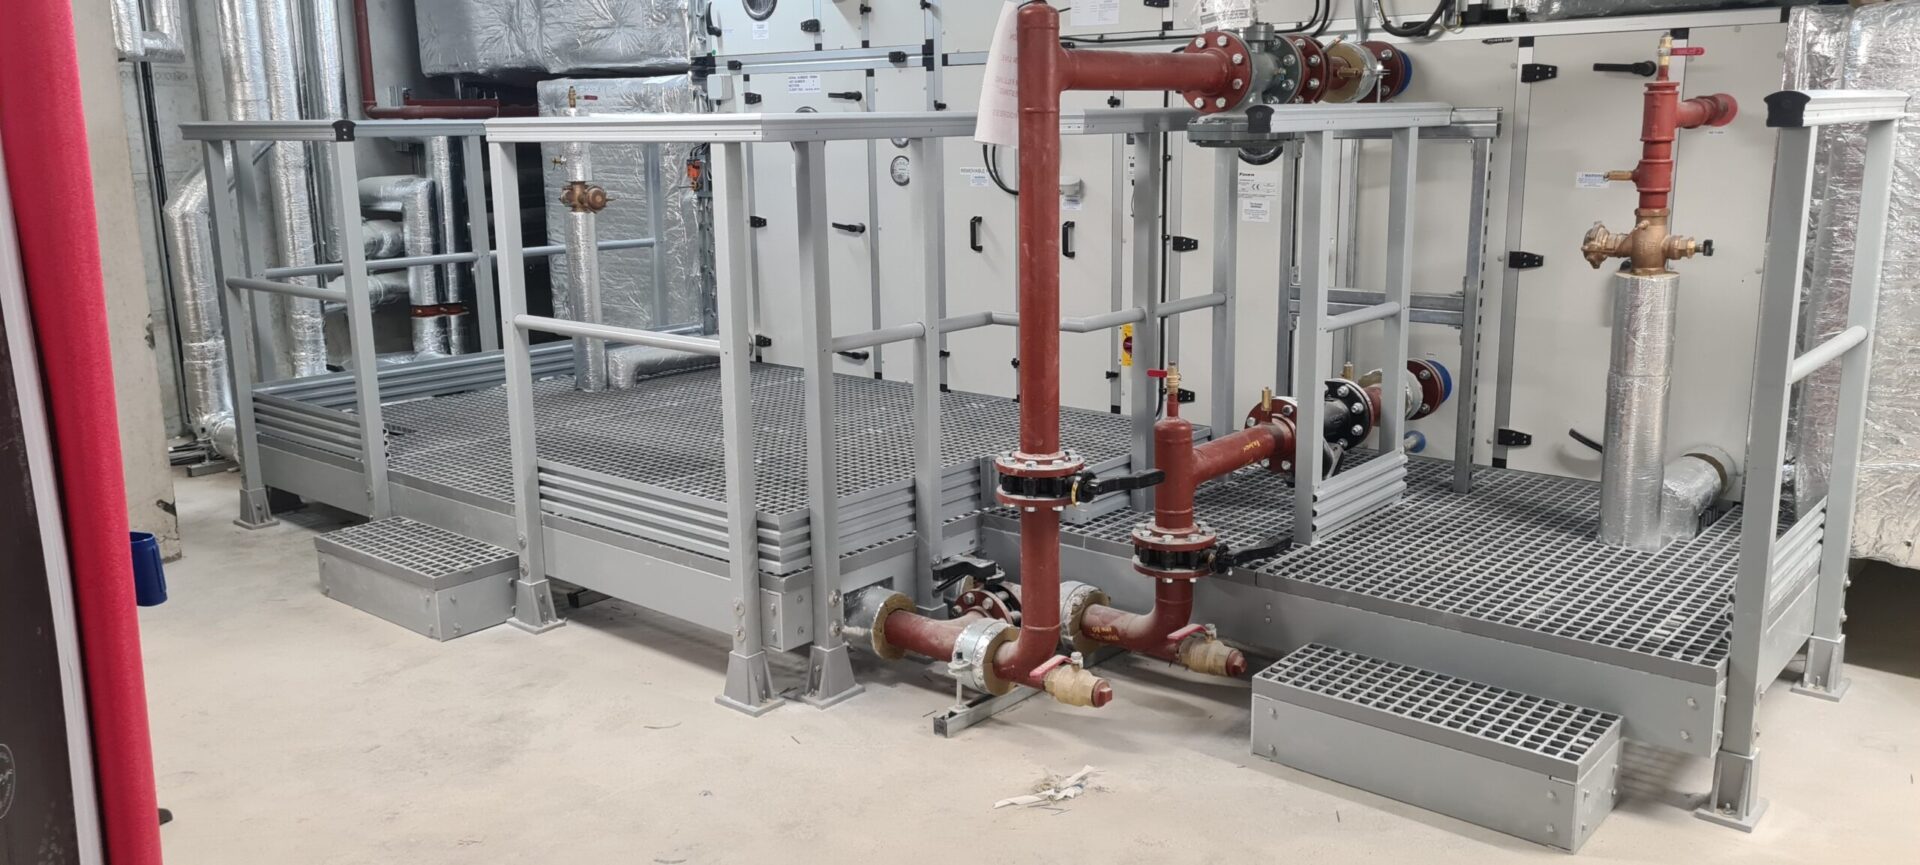 Maintenance platforms protect pipes and cables